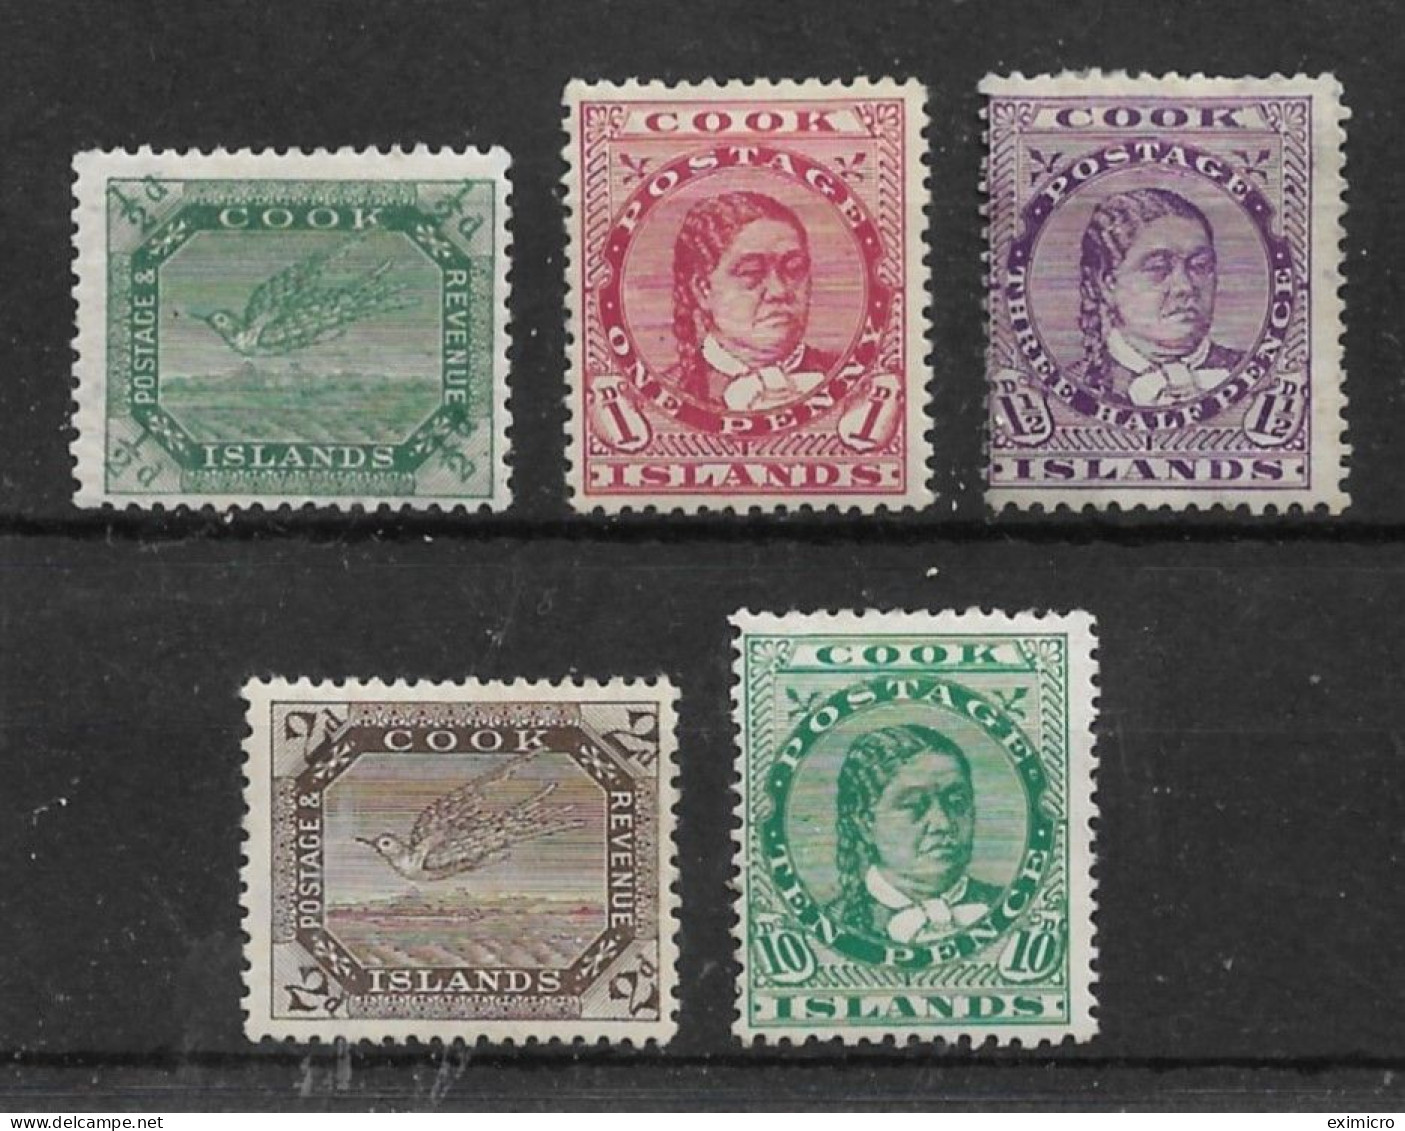 COOK ISLANDS 1913 - 1919 VALUES TO 10d SG 39a, 41, 43, 44, 45 MOUNTED MINT Cat £96 - Cook